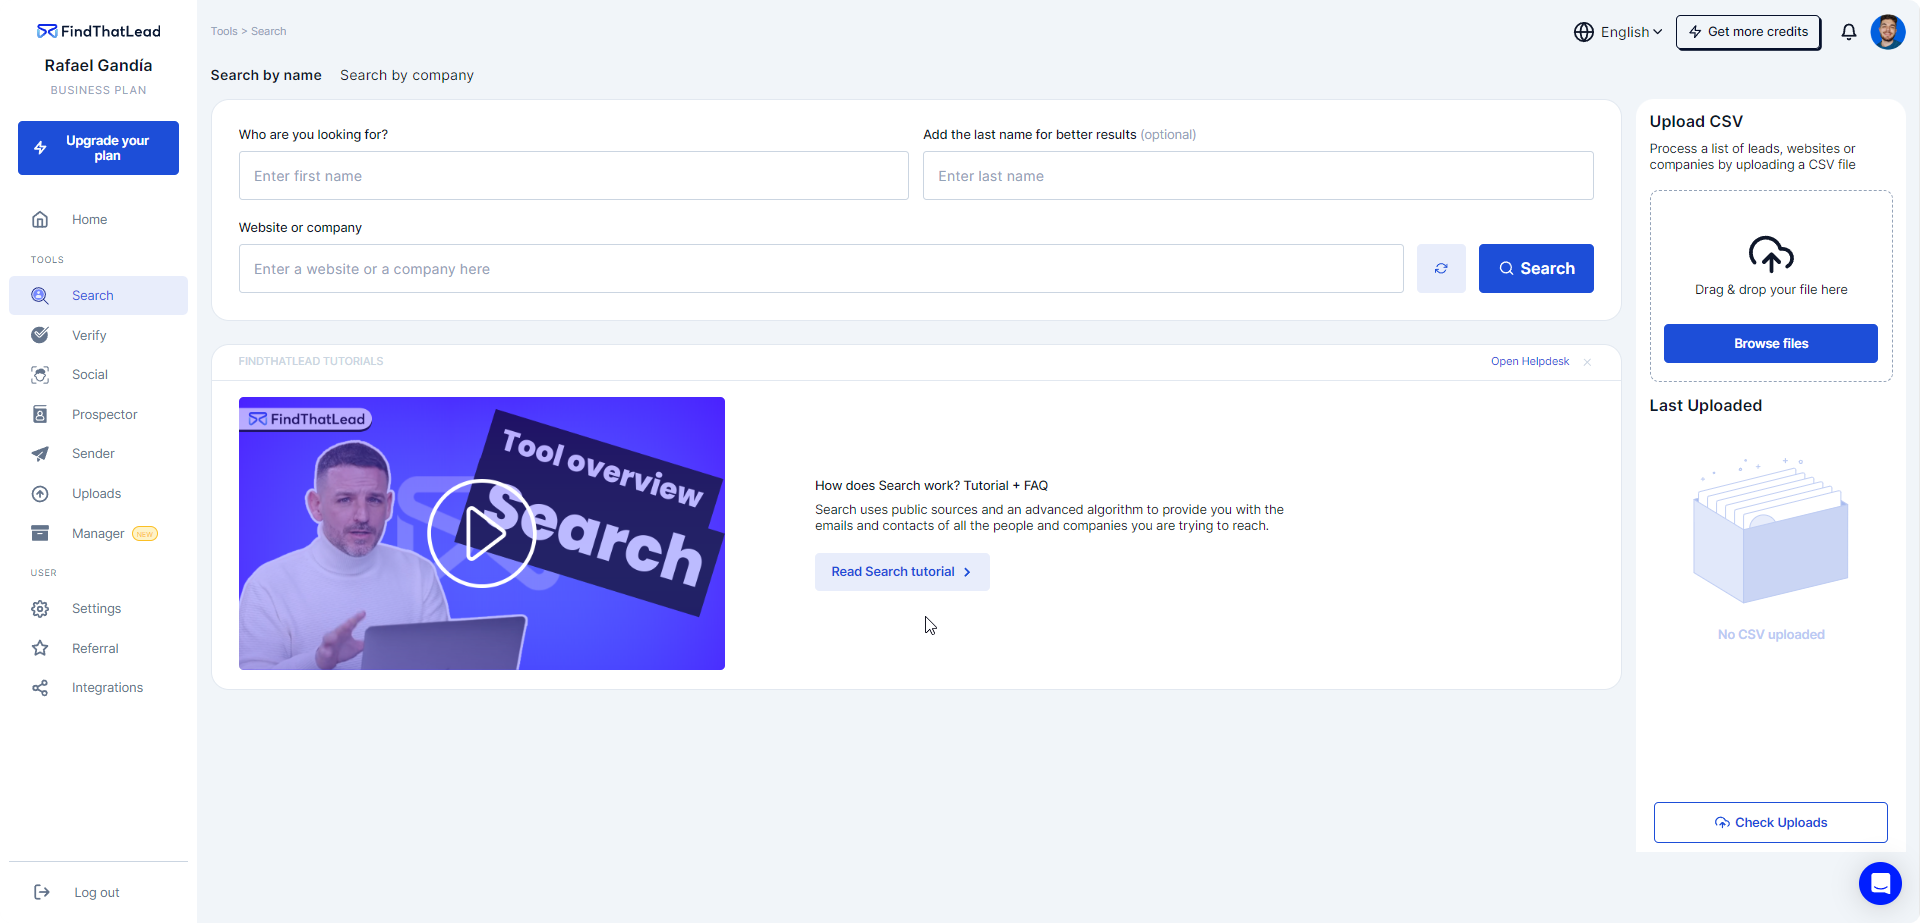 Email search tool